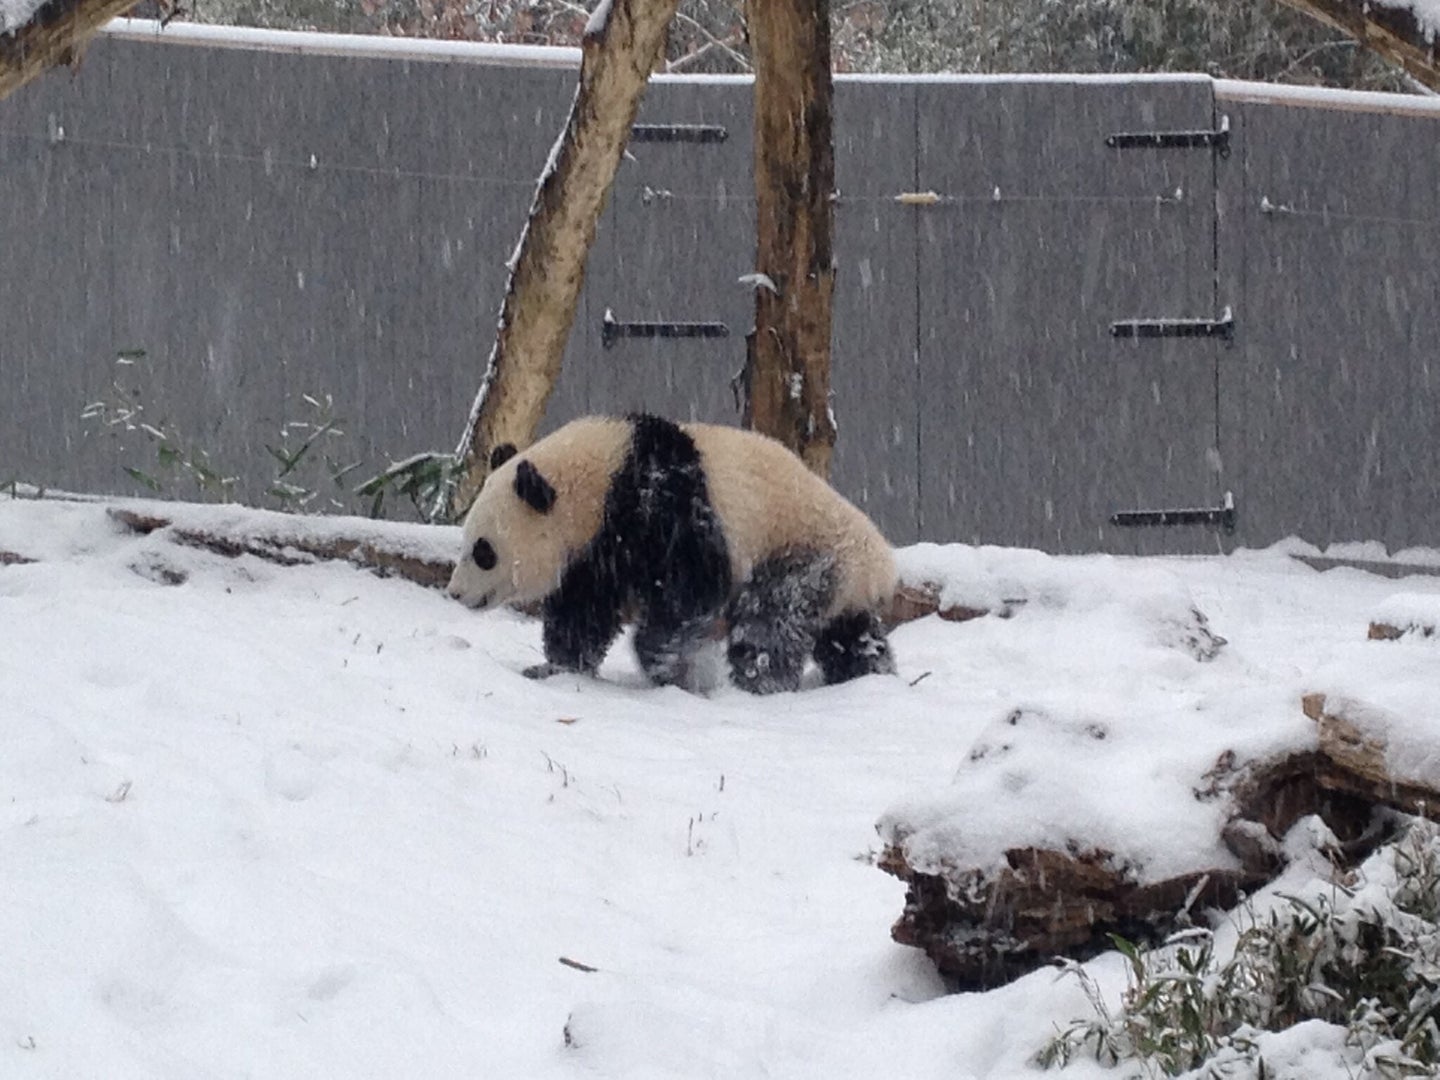 Giant panda playing in a snow-covered enclosure at the National Zoo in Washington D.C.